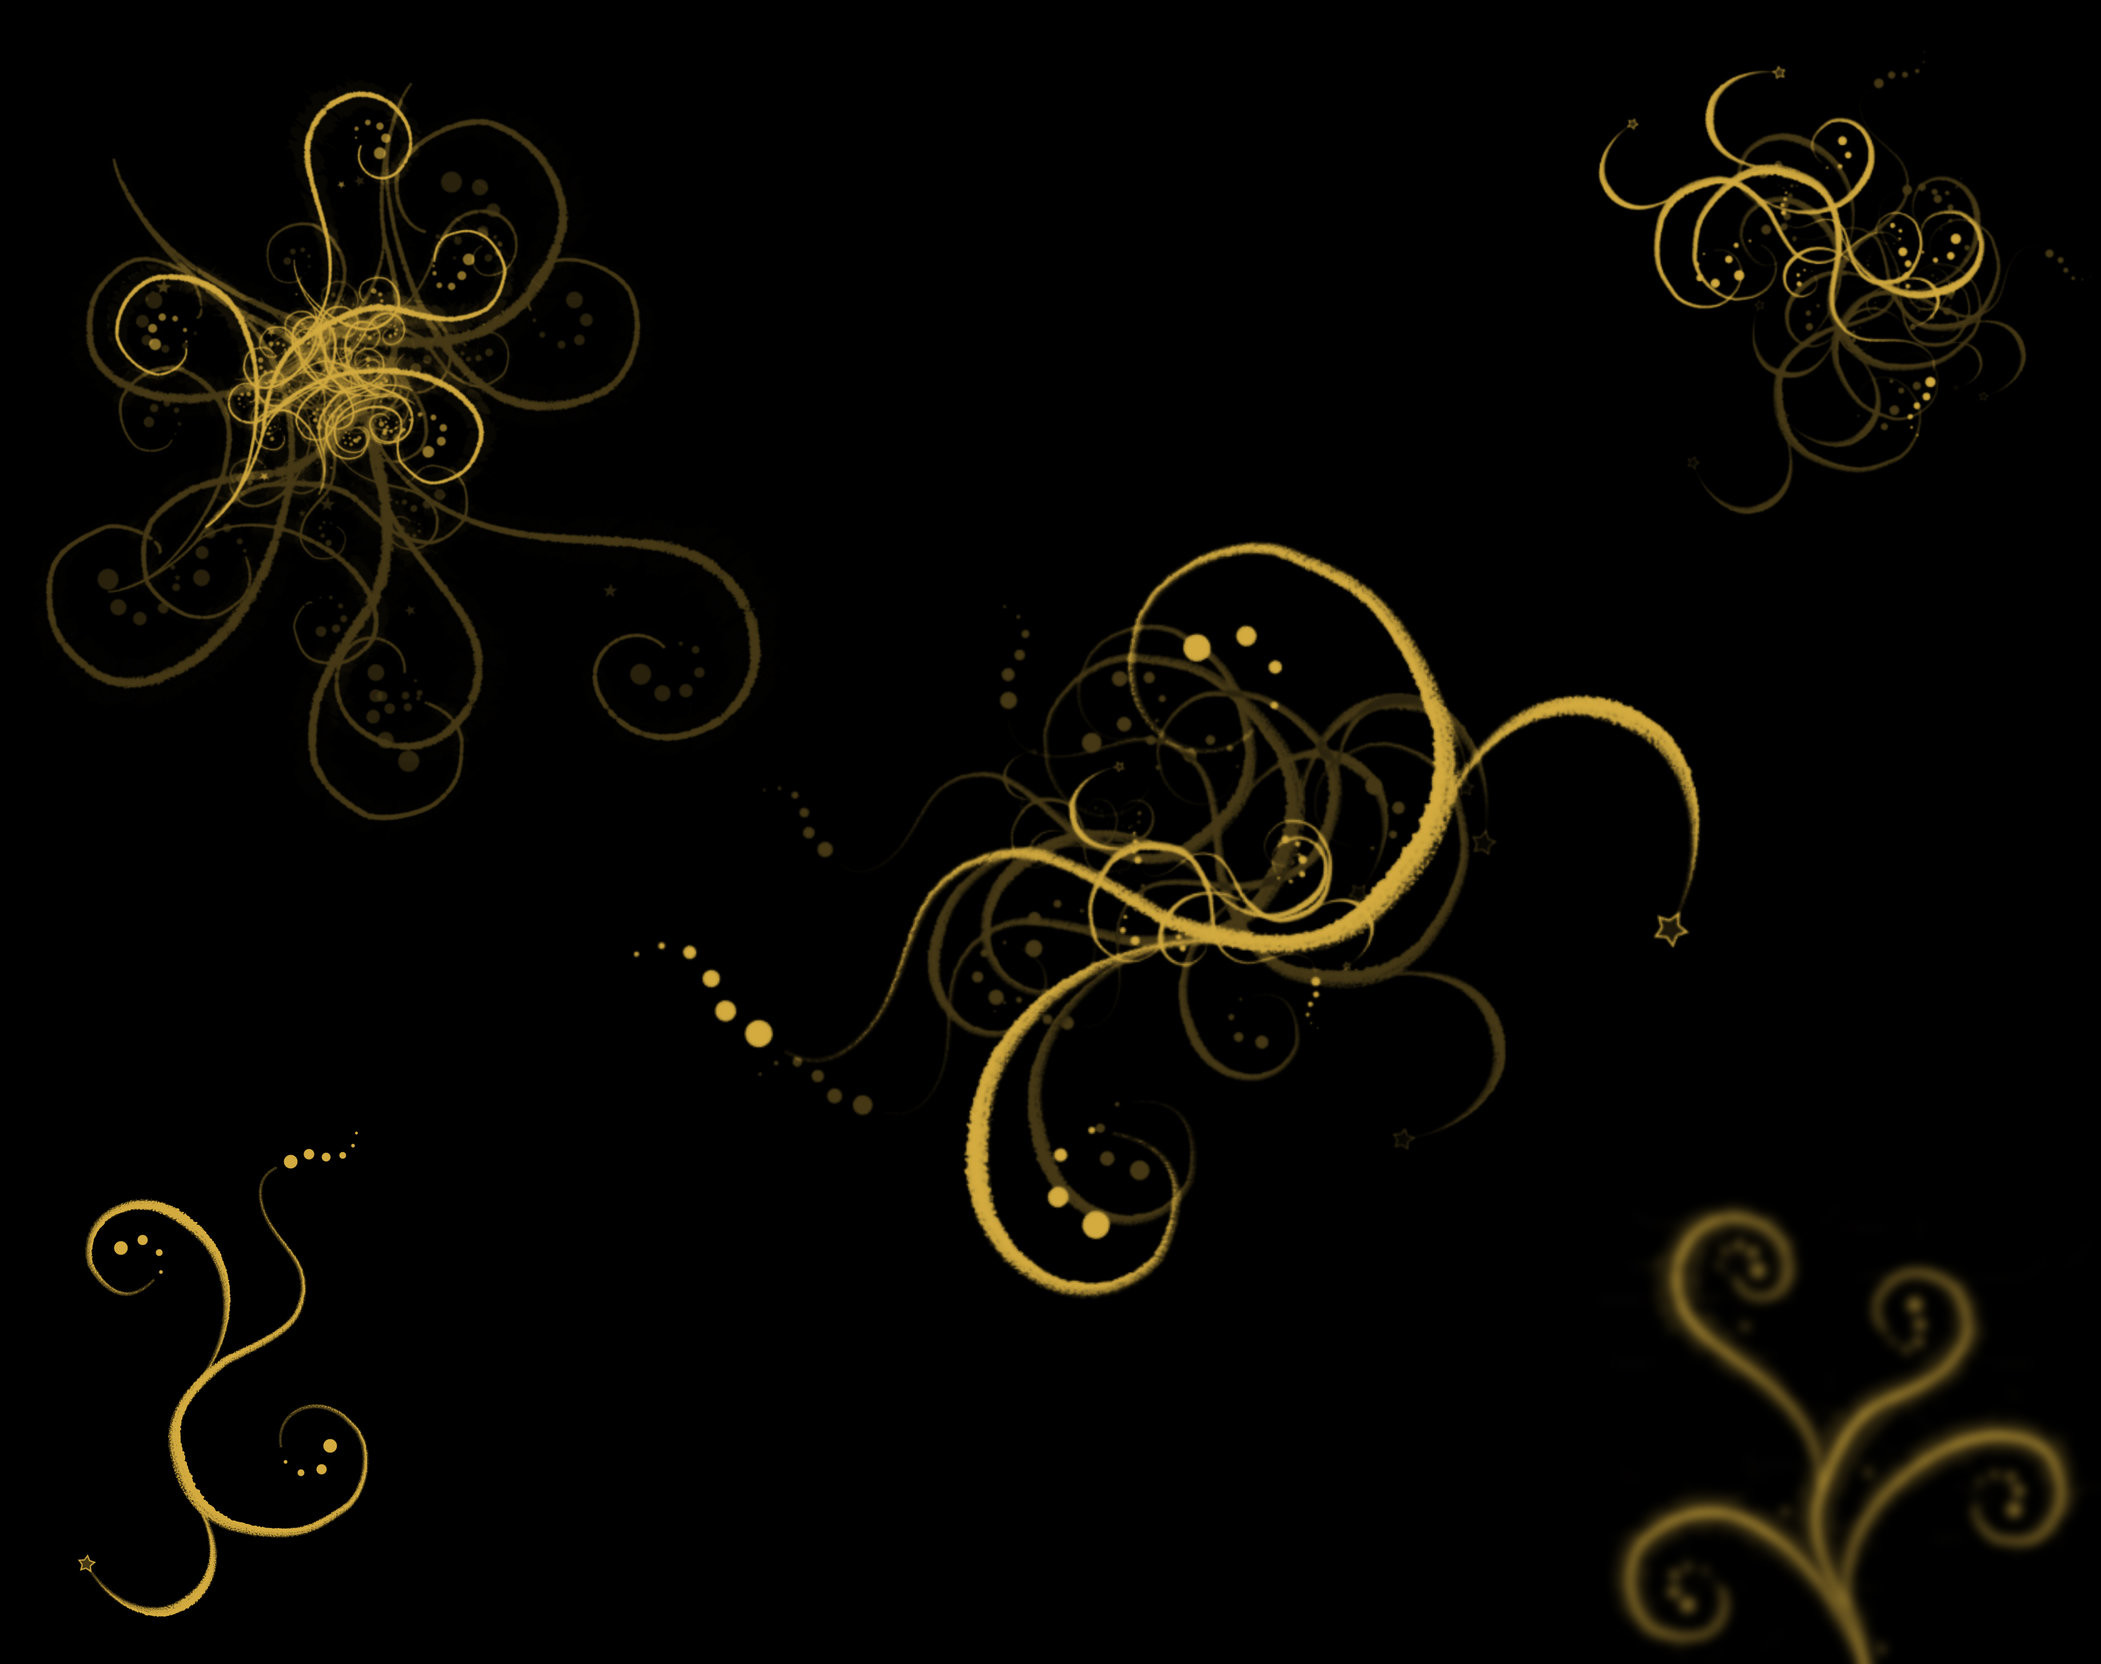 2101x1664 Black And Gold Wallpaper Hd Android Desktop Abstract Iphone 5 Design